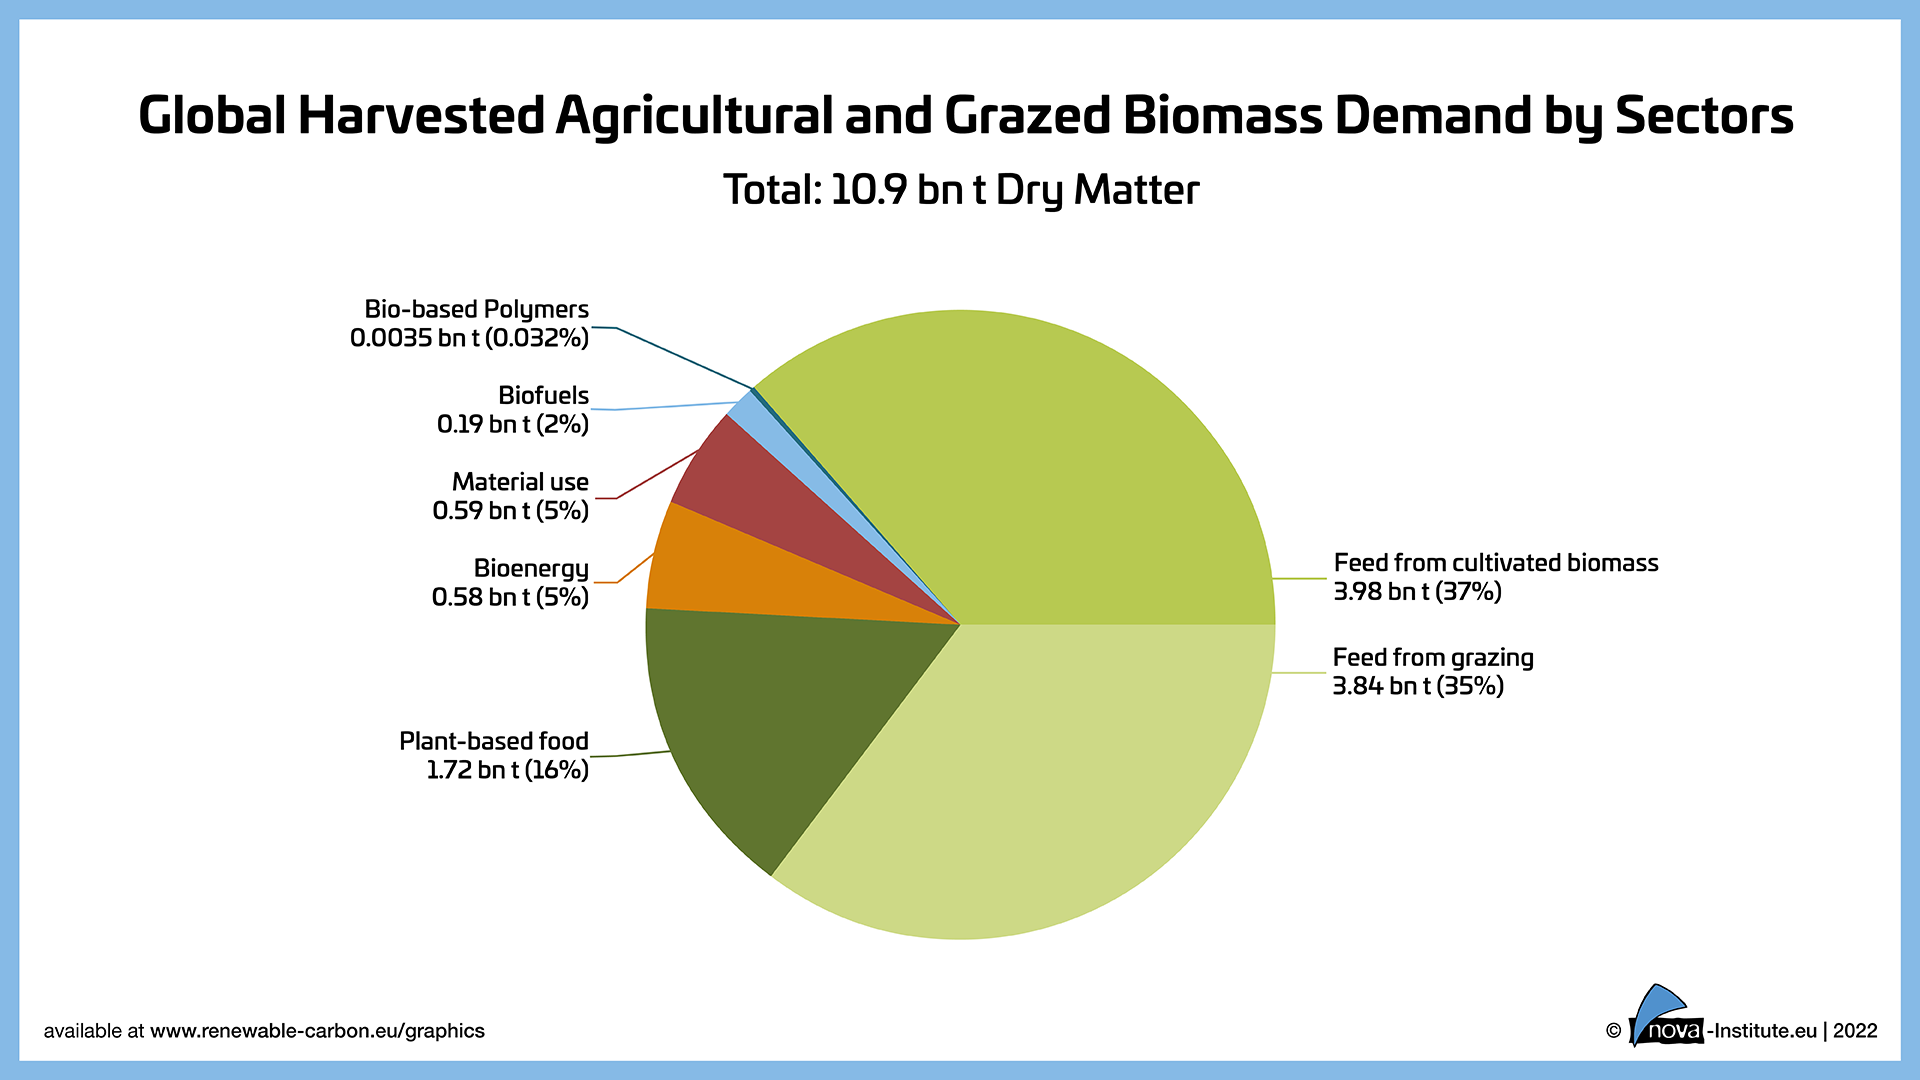 Global Harvested Agricultural and Grazed Biomass Demand by Sectors